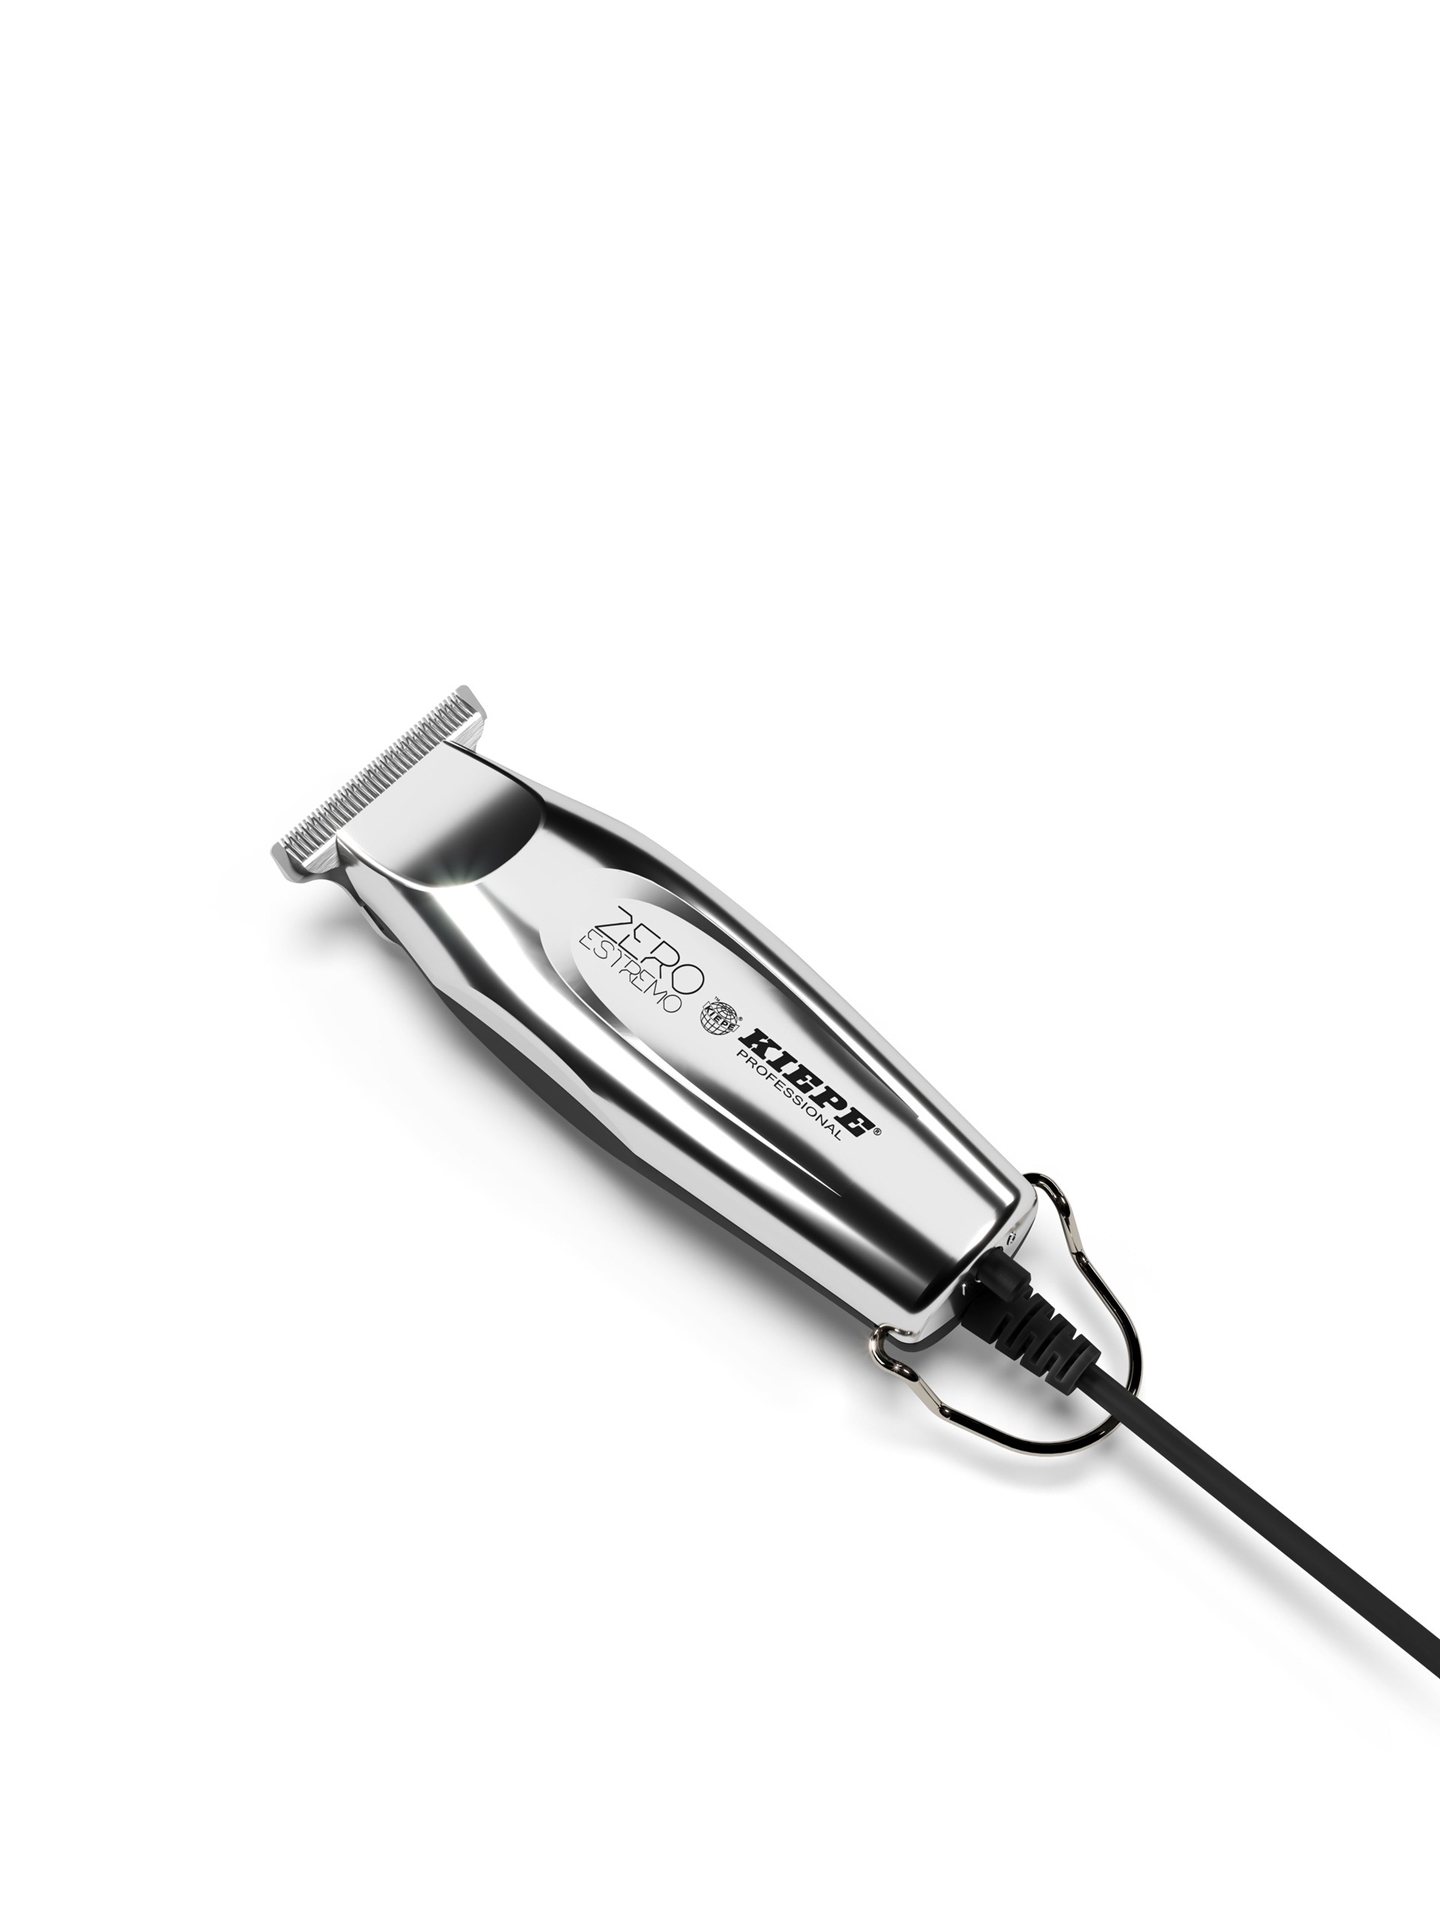 kiepe clippers review